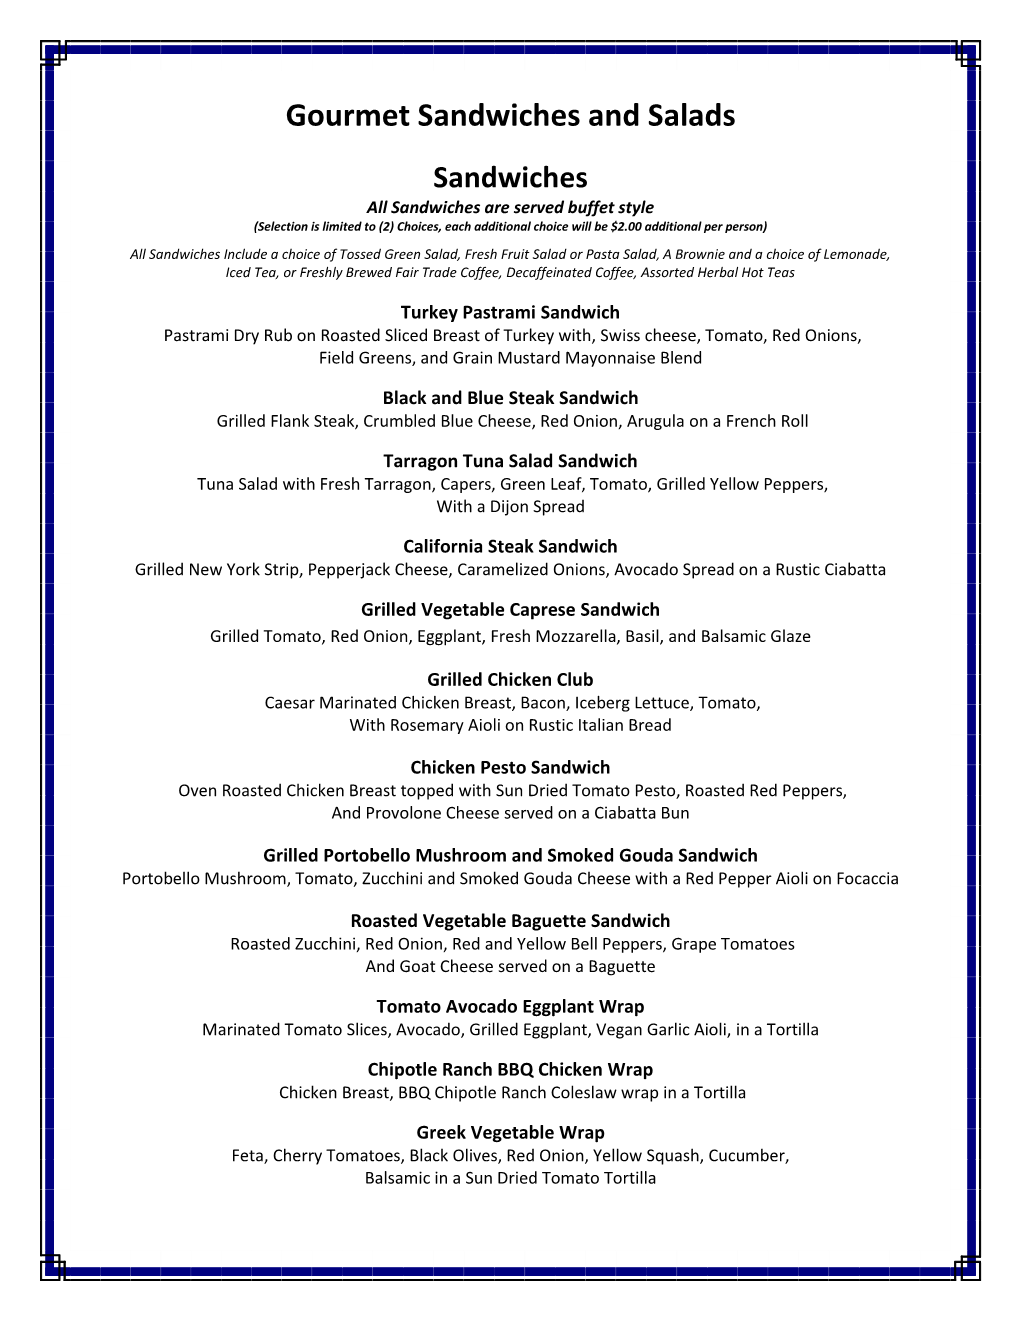 Catering Menu: Gourmet Sandwiches and Salads